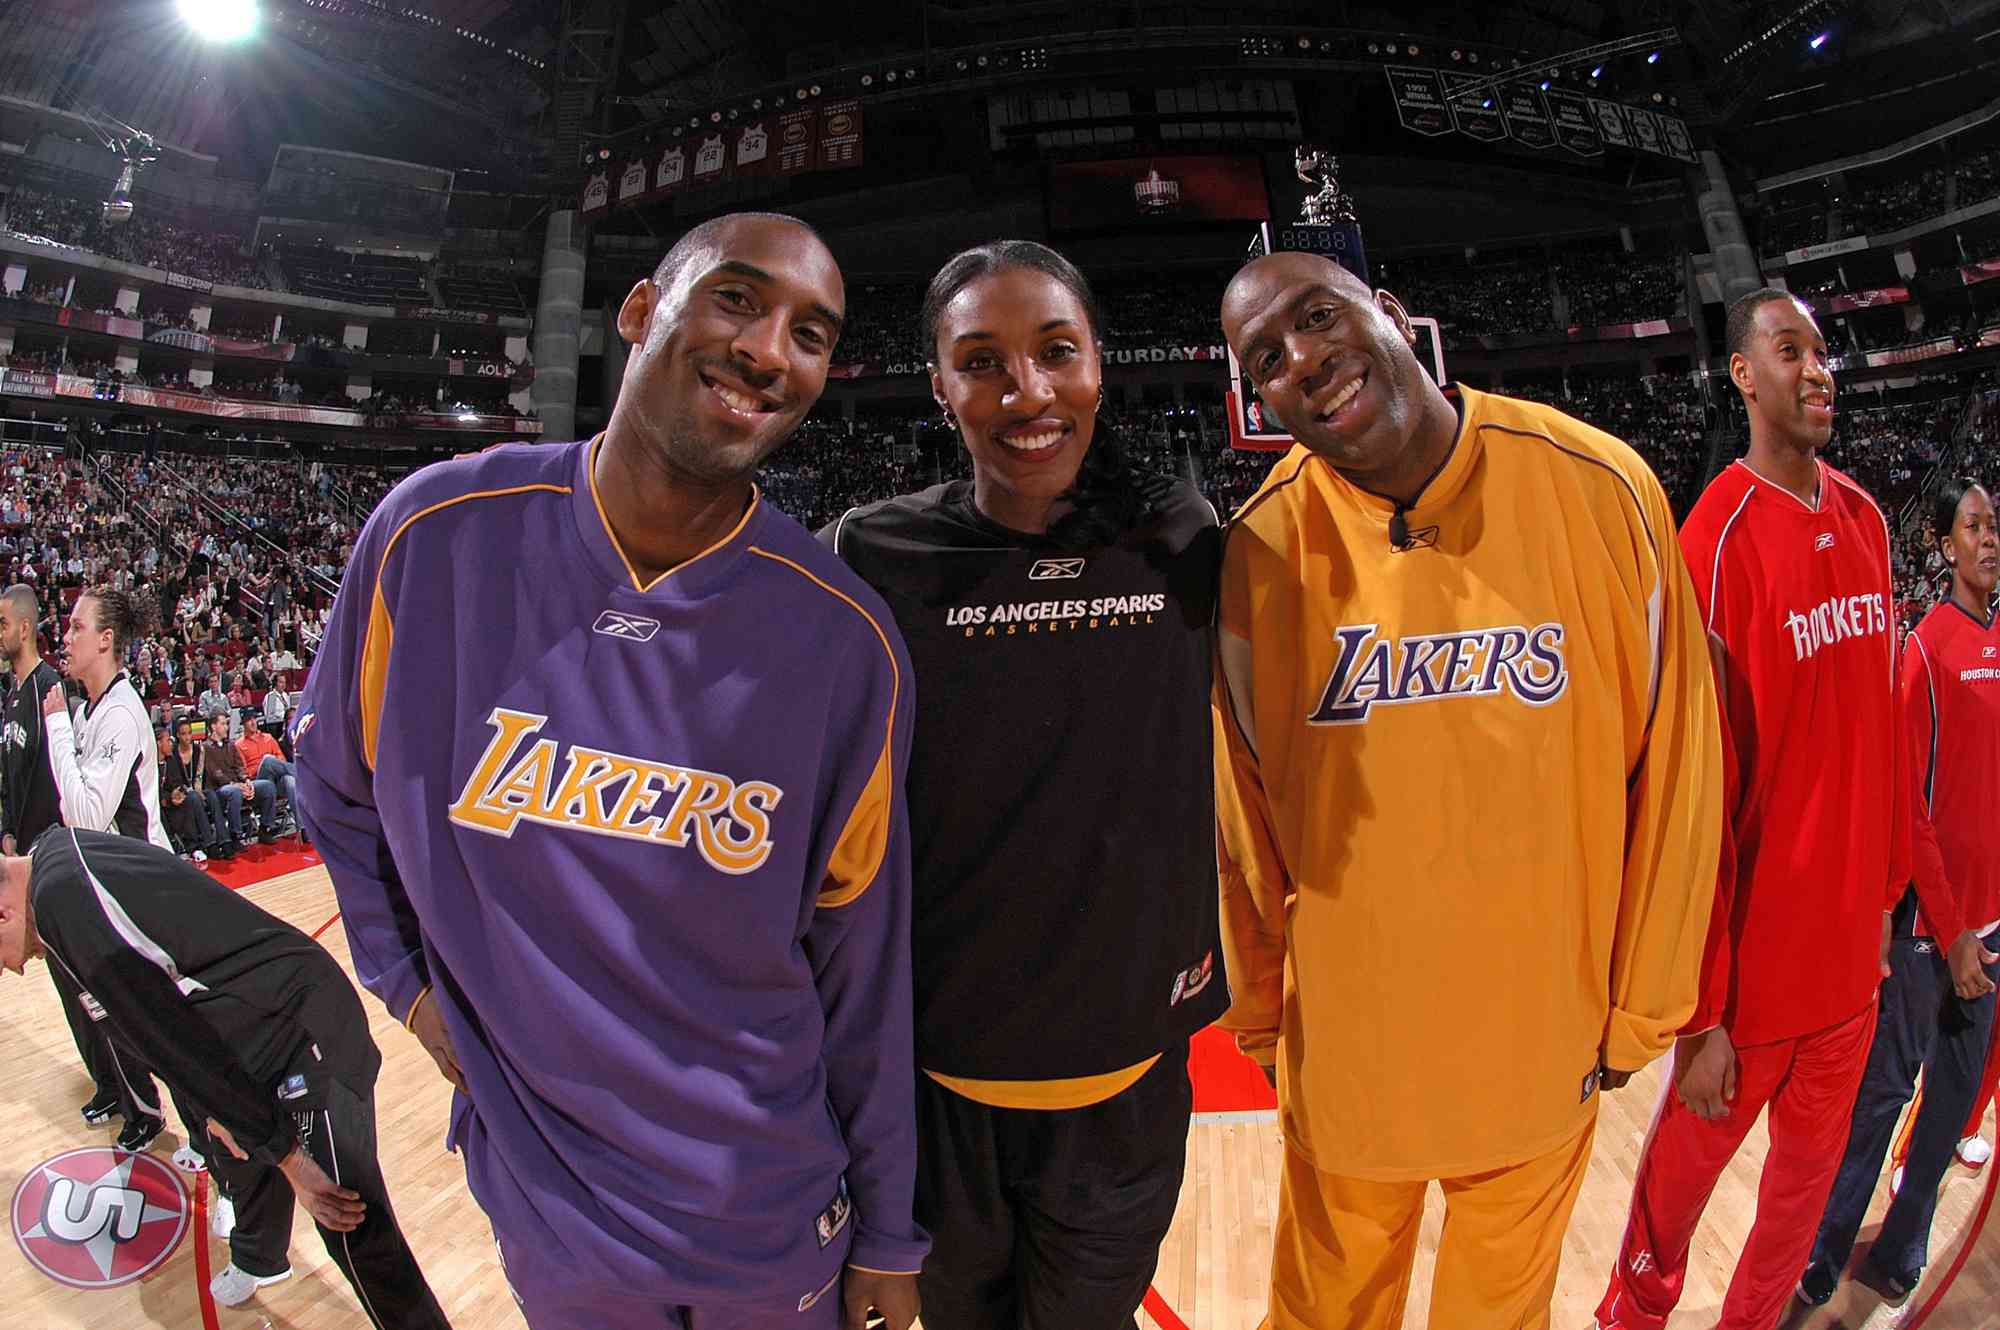 Kobe Bryant #8 of the Los Angeles Lakers, Lisa Leslie #9 of the Los Angeles Sparks and former Los Angeles Lakers guard Earvin "Magic" Johnson pose for a photo during the Radio Schack Shooting Stars competition on All-Start Saturday Night during 2006 All-Star Weekend February 18, 2006 